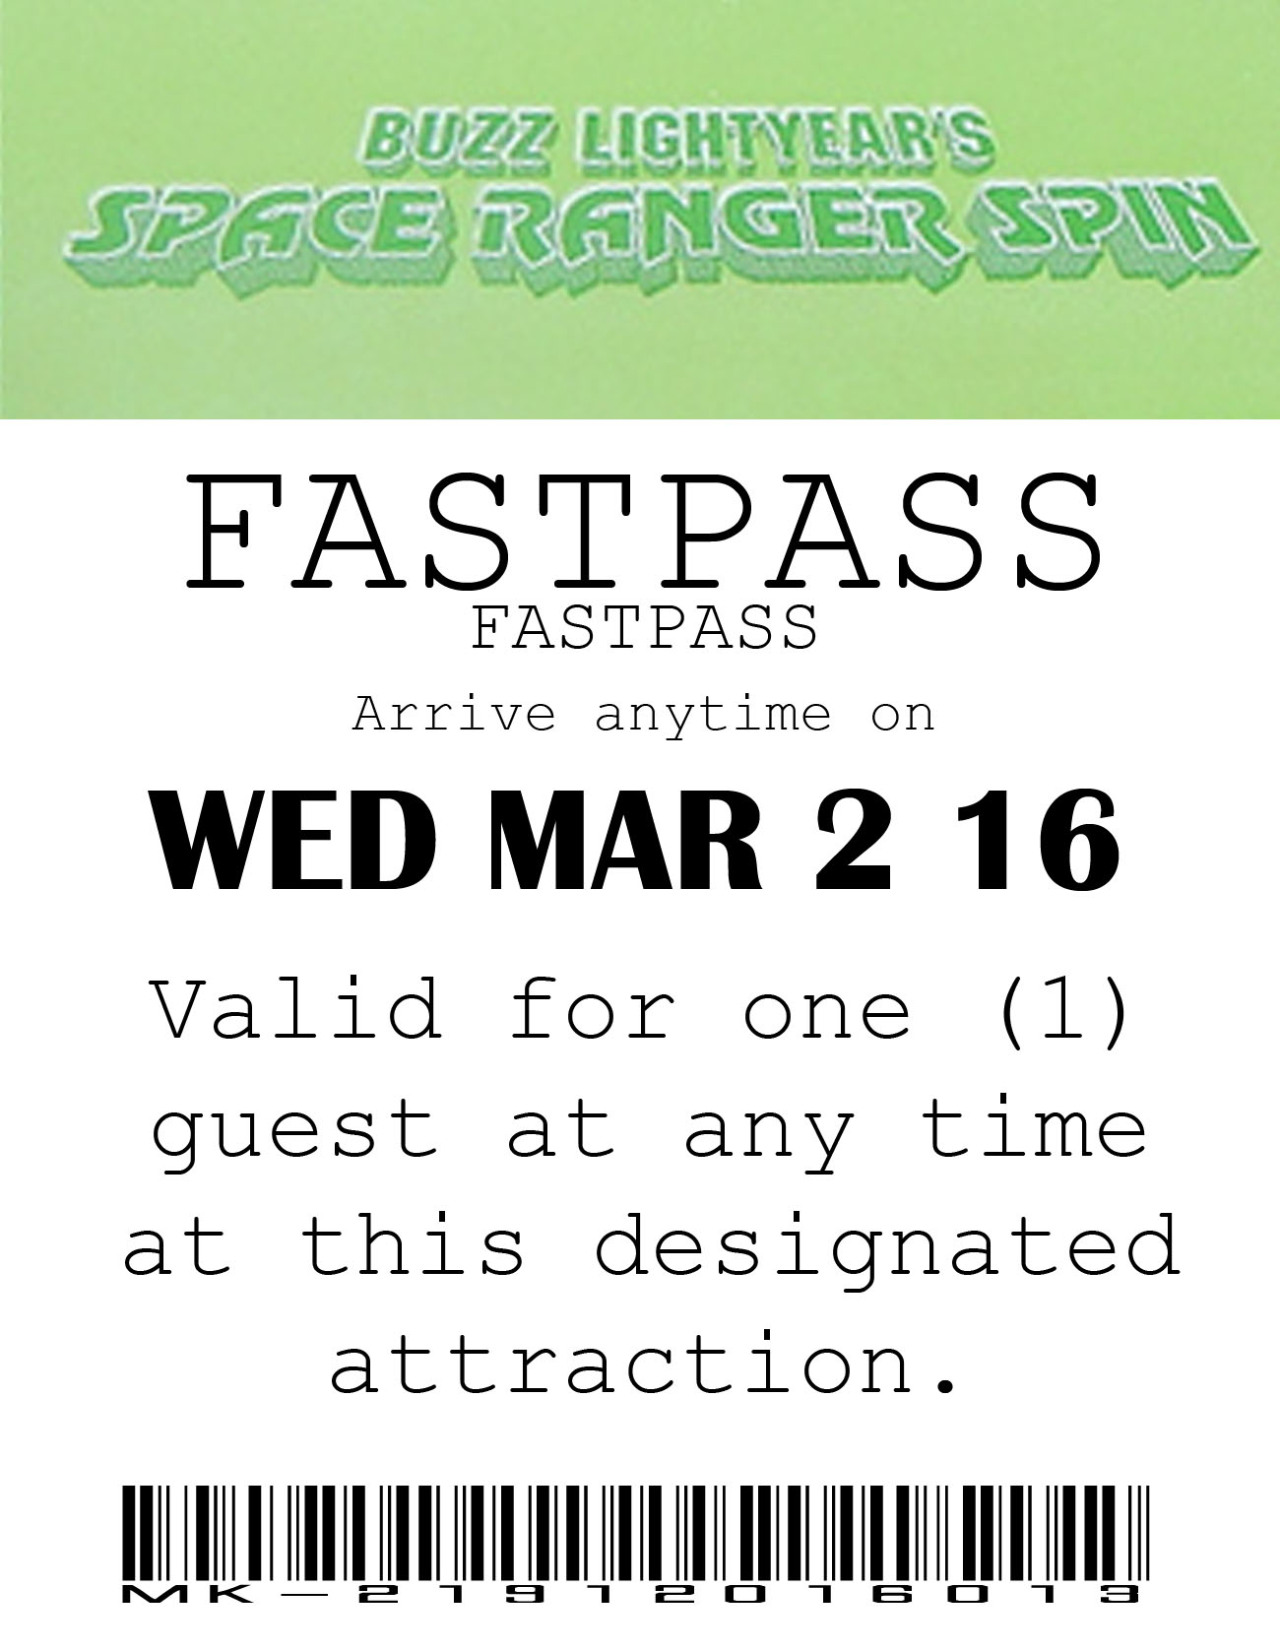 Photoshopped Fastpass for Buzz Lightyear with a date of March 2 2016, good for one guest.